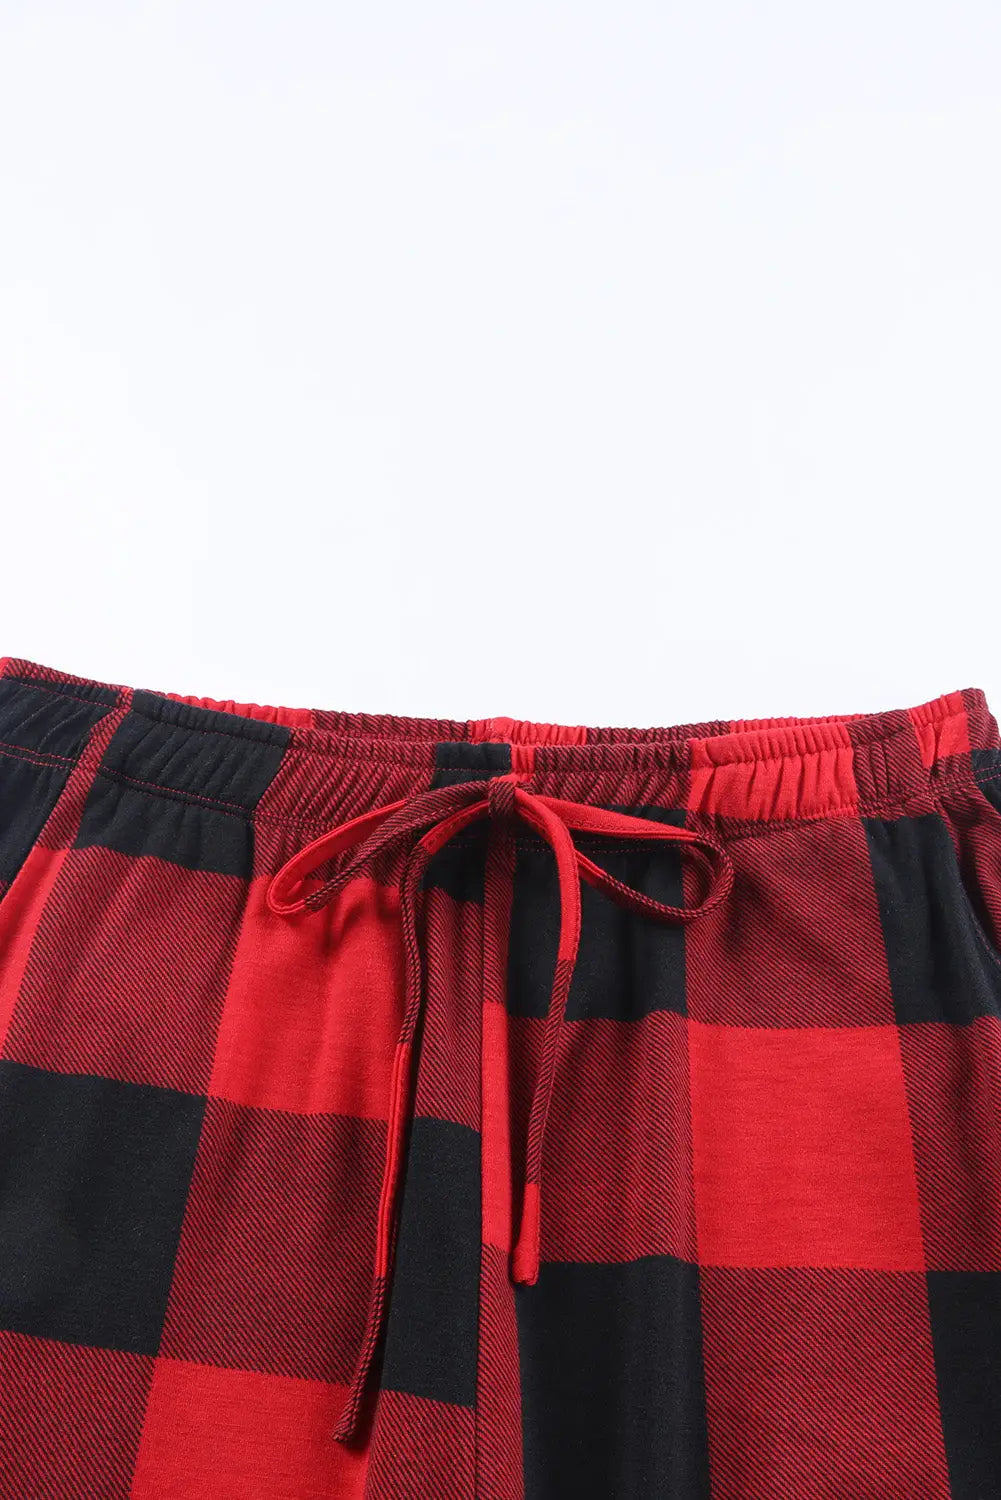 Red plaid merry christmas graphic loungewear set